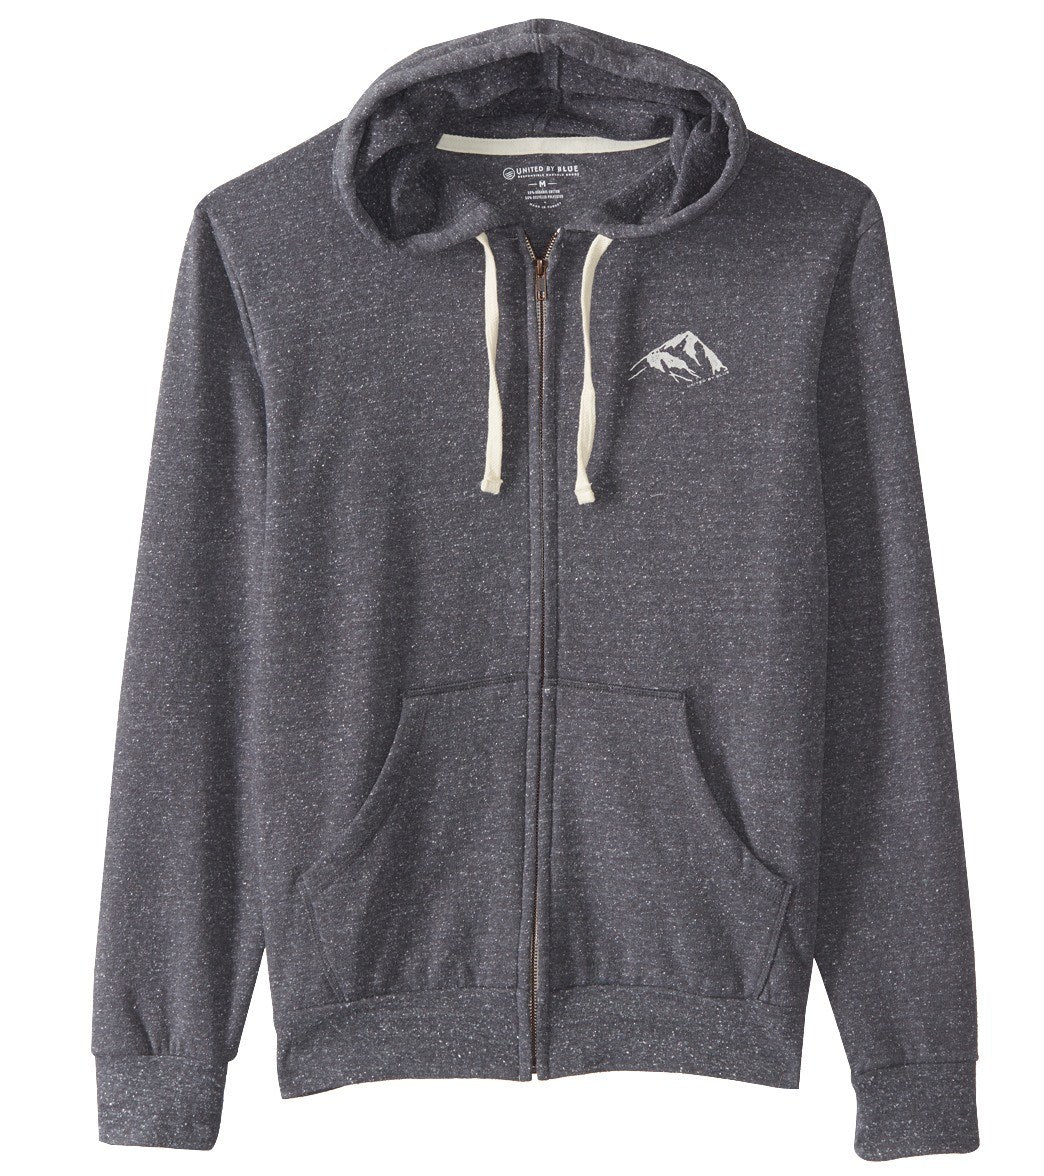 United By Blue Men's Made For The Mountains Zip Up Hoodie - Charcoal Small Cotton/Polyester - Swimoutlet.com